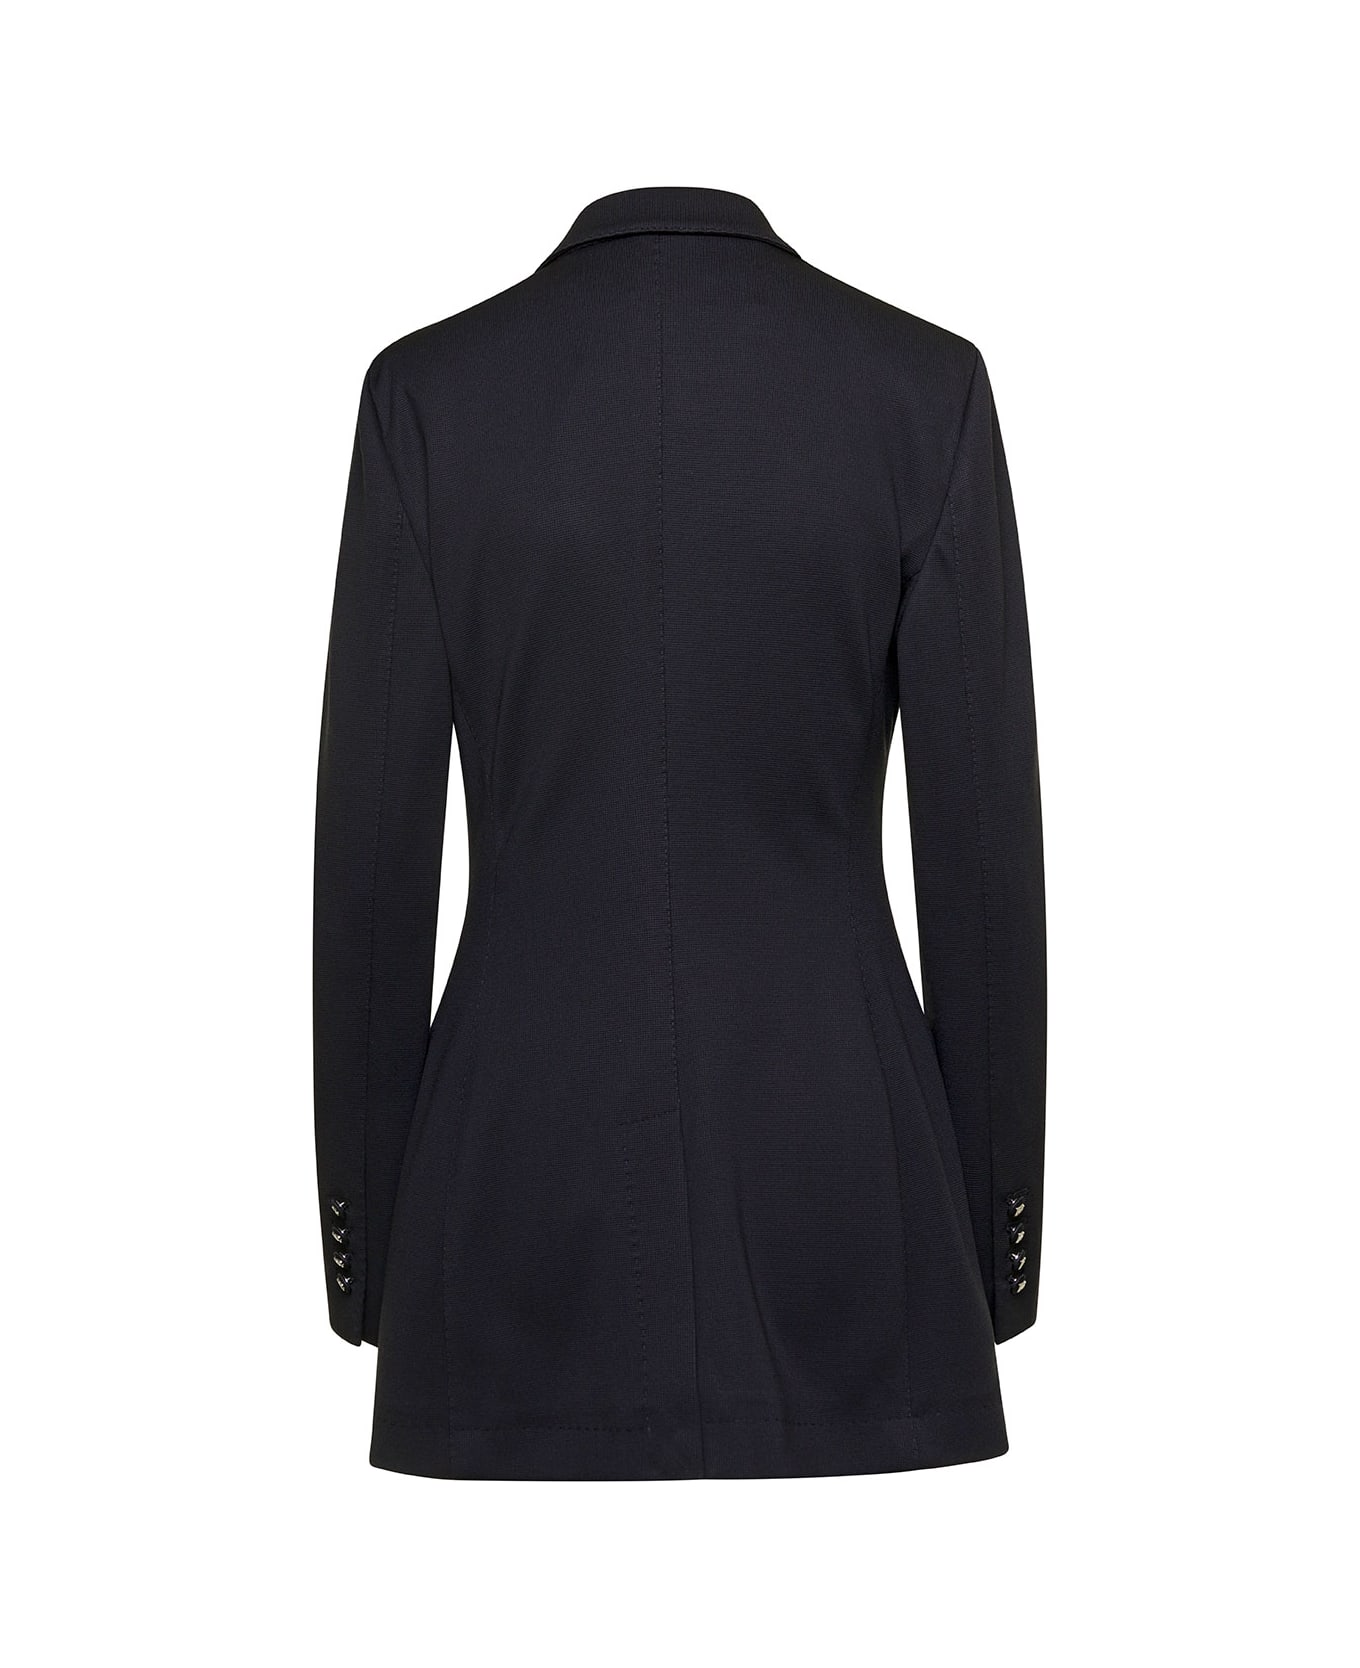 Dolce & Gabbana Black Double-breasted Jacket With Branded Covered Buttons In Viscose Blend Woman - Black